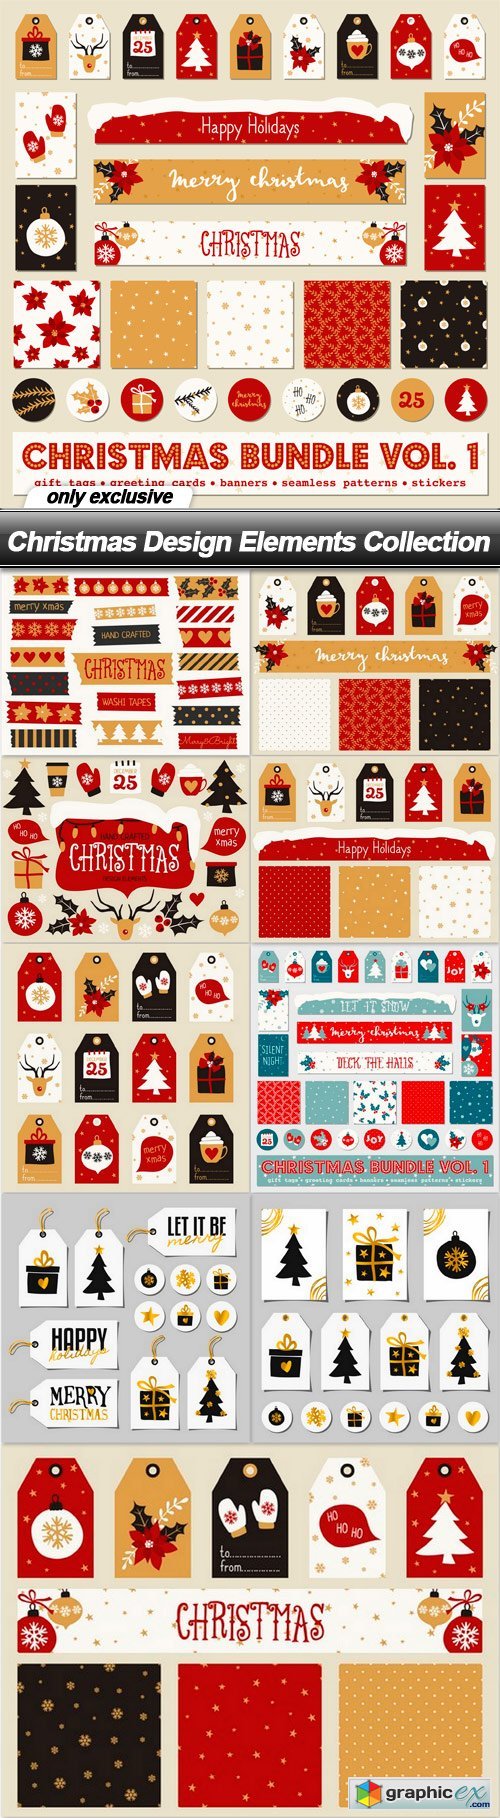 Christmas Design Elements Collection - 10 EPS